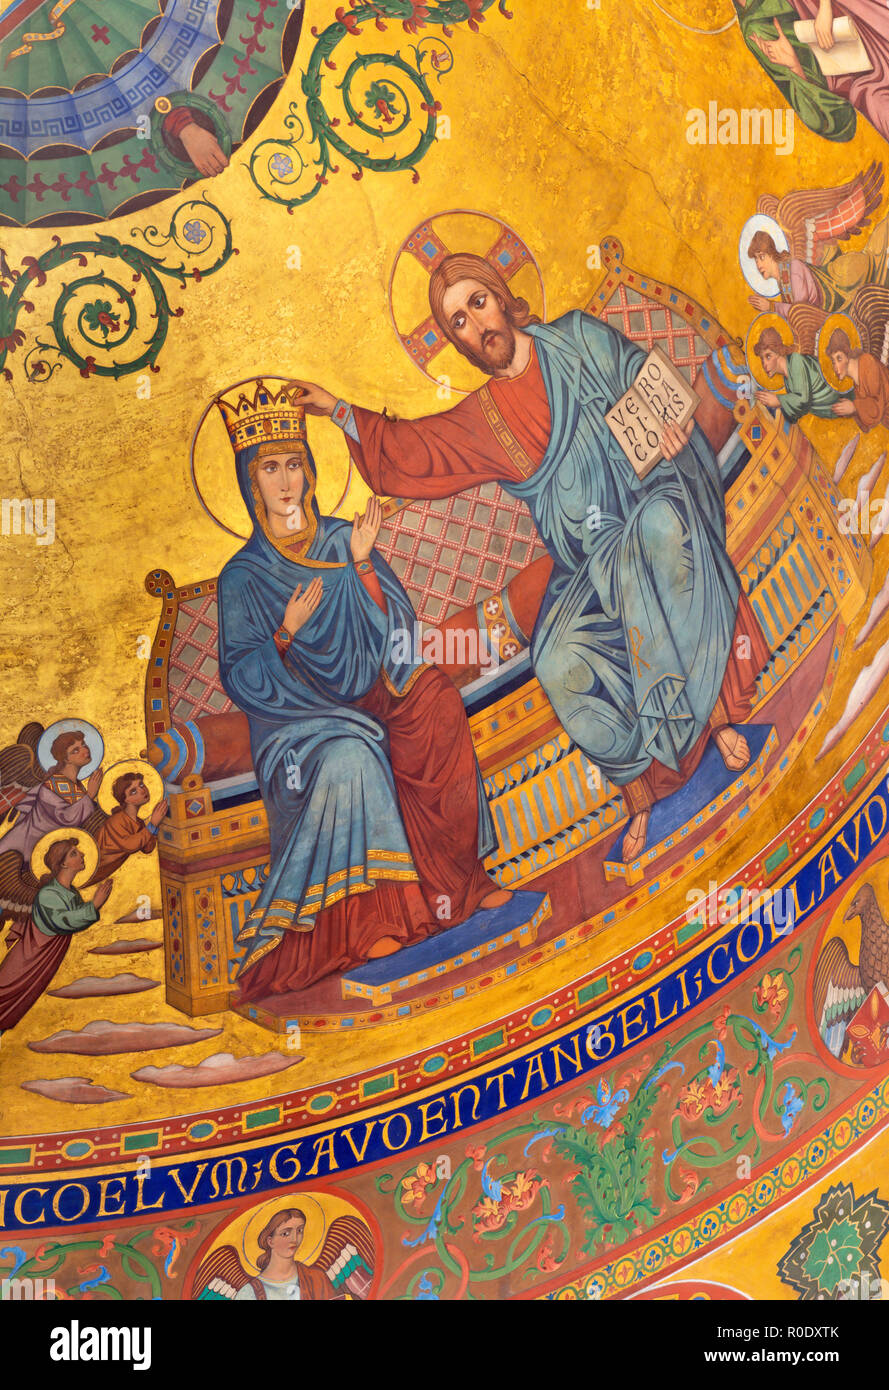 MODENA, ITALY - APRIL 14, 2018: The Coronation of Virgin Mary fresco in byzantine style in main apse of Duomo by Forti and Migliorini from 19. cent. Stock Photo